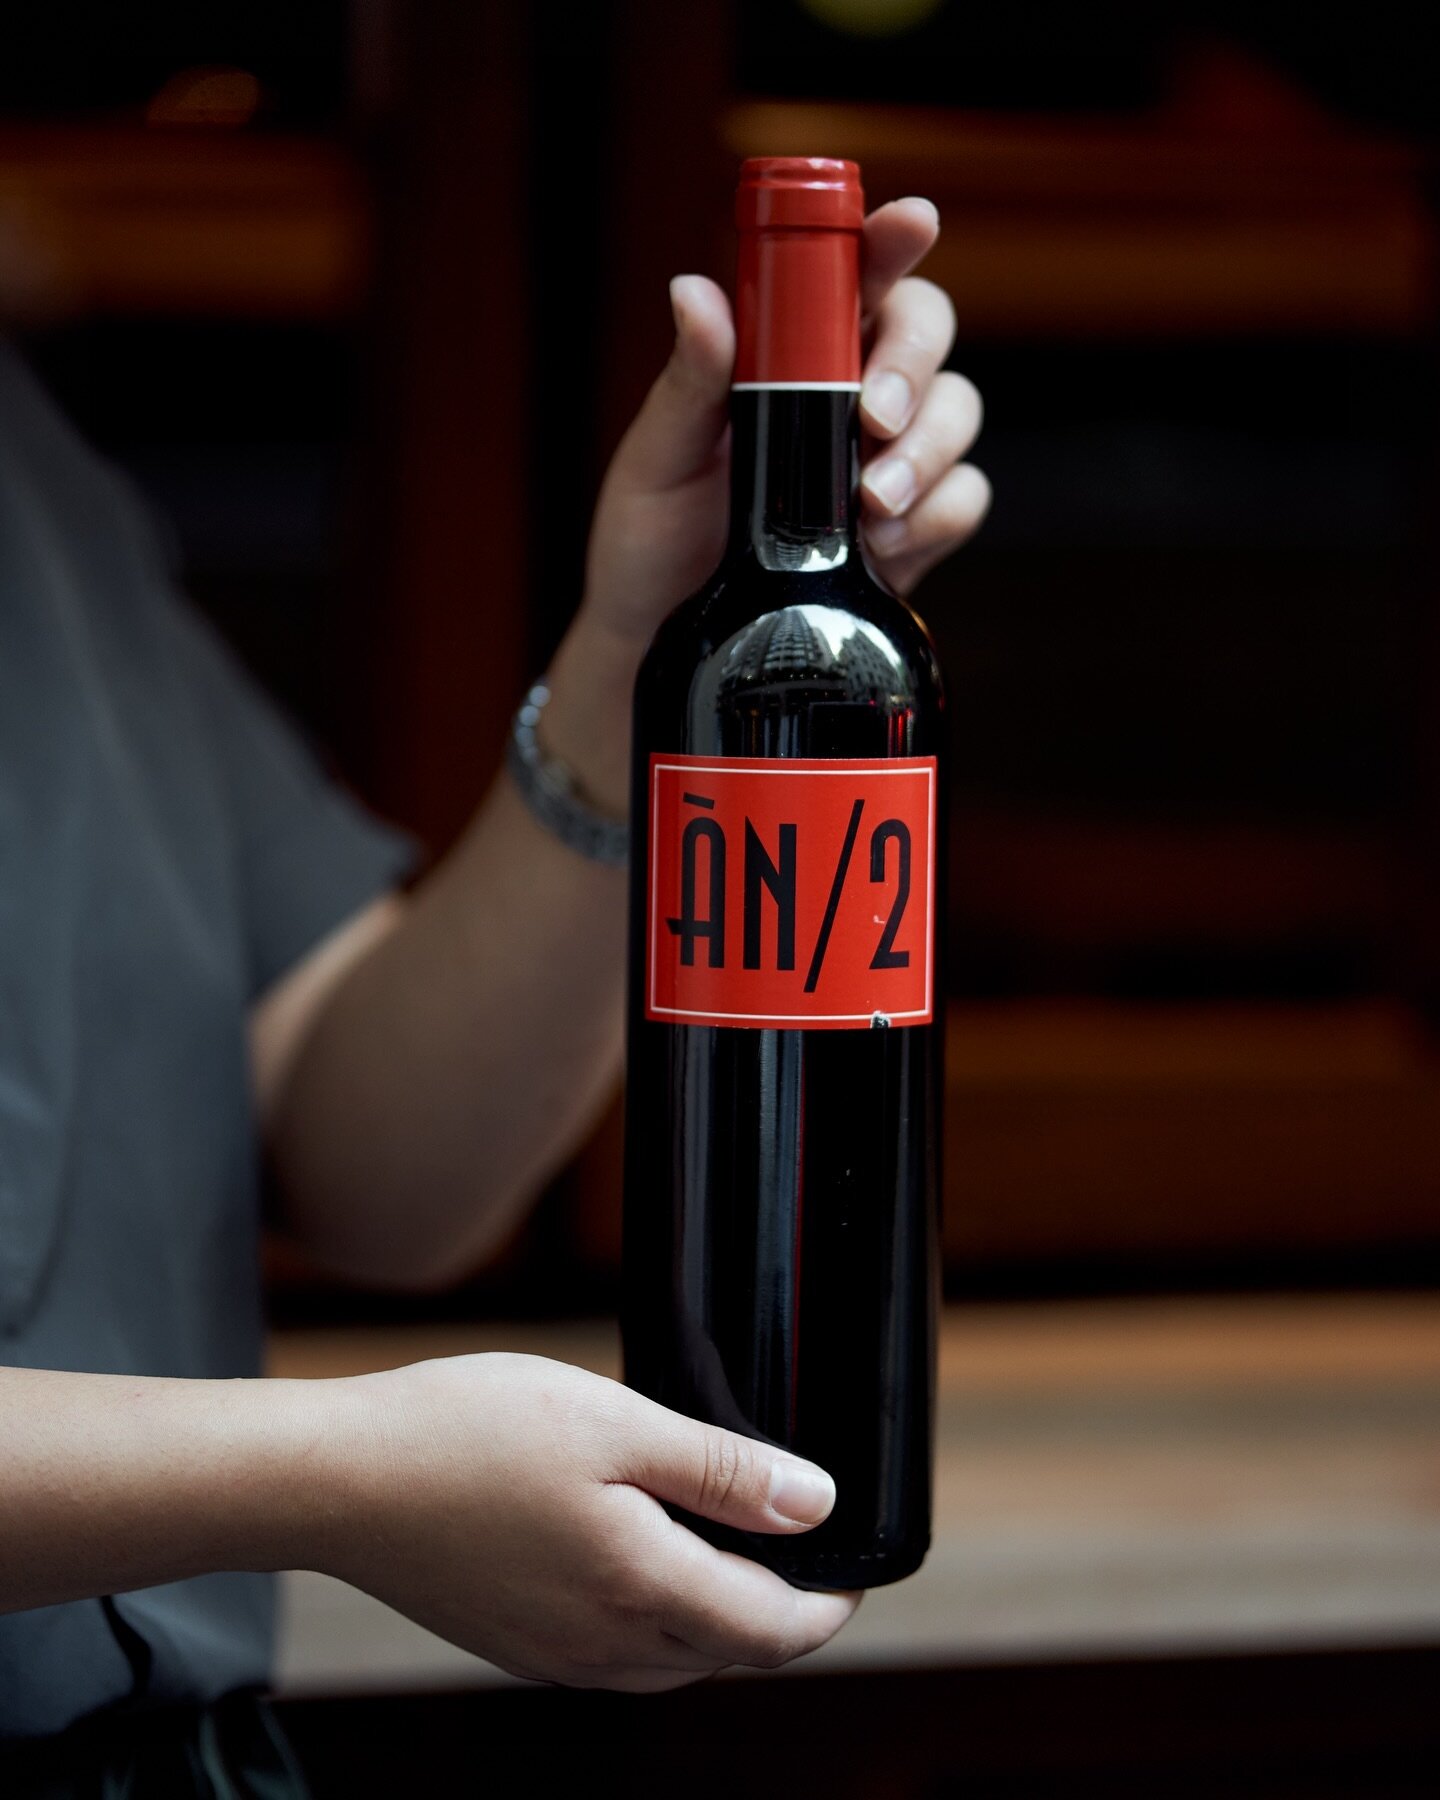 Boasting a stunning deep ruby-red hue that catches the eye, this beautiful Anima Negra &Agrave;N/2 is a true gem. Crafted with the utmost care, it showcases the finest indigenous grape varieties from the Island of Mallorca, including Callet! With int